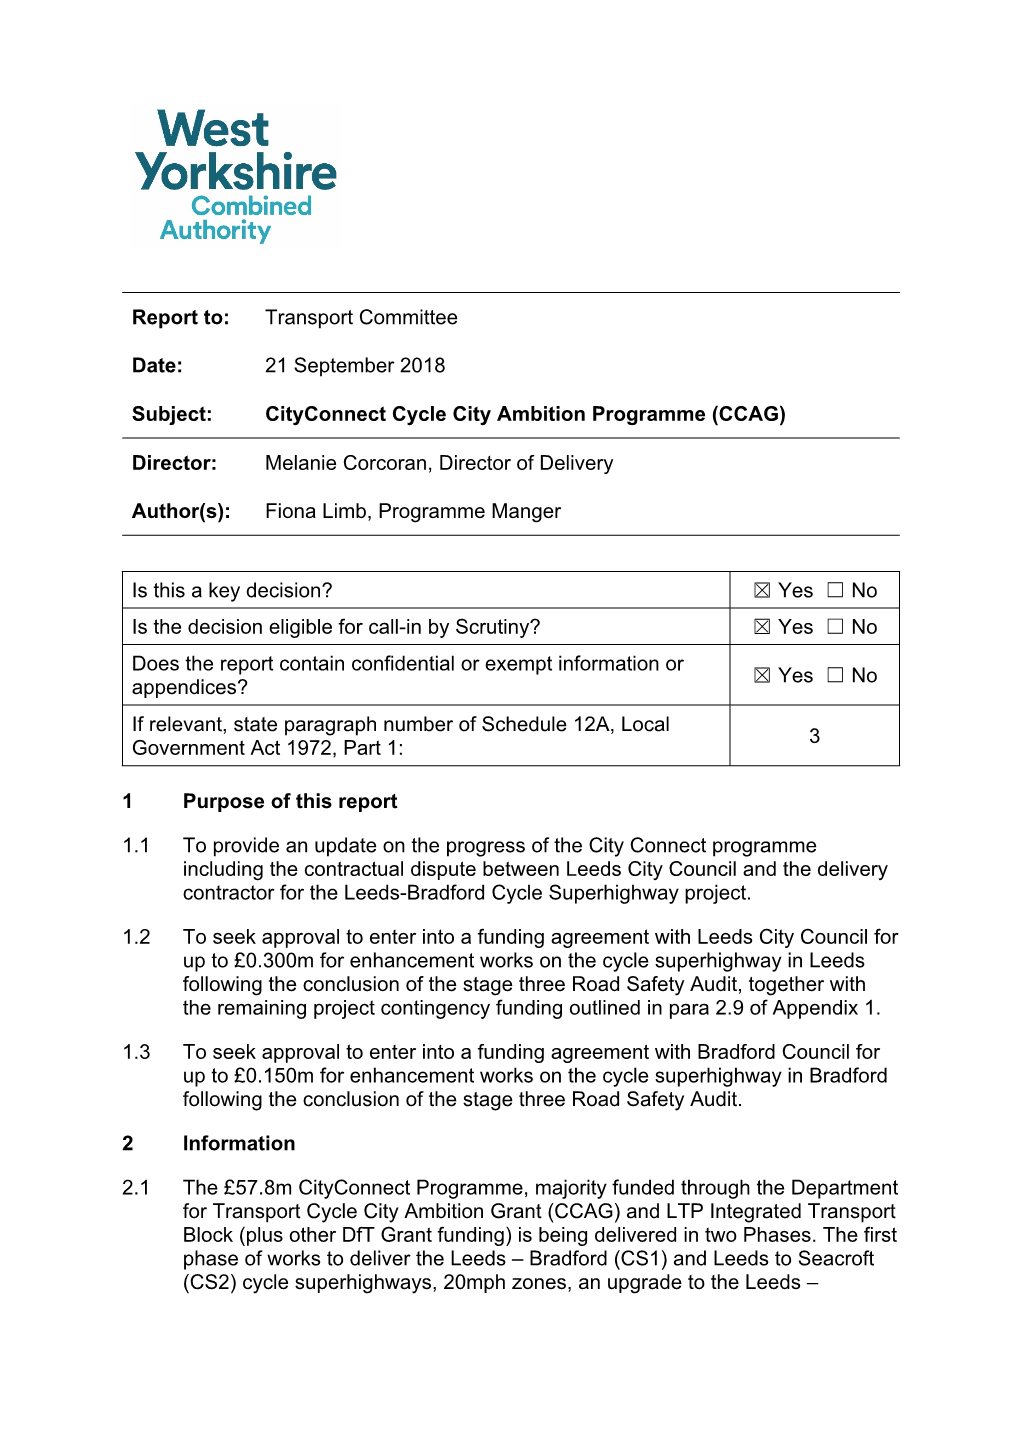 Report To: Transport Committee Date: 21 September 2018 Subject: Cityconnect Cycle City Ambition Programme (CCAG) Director